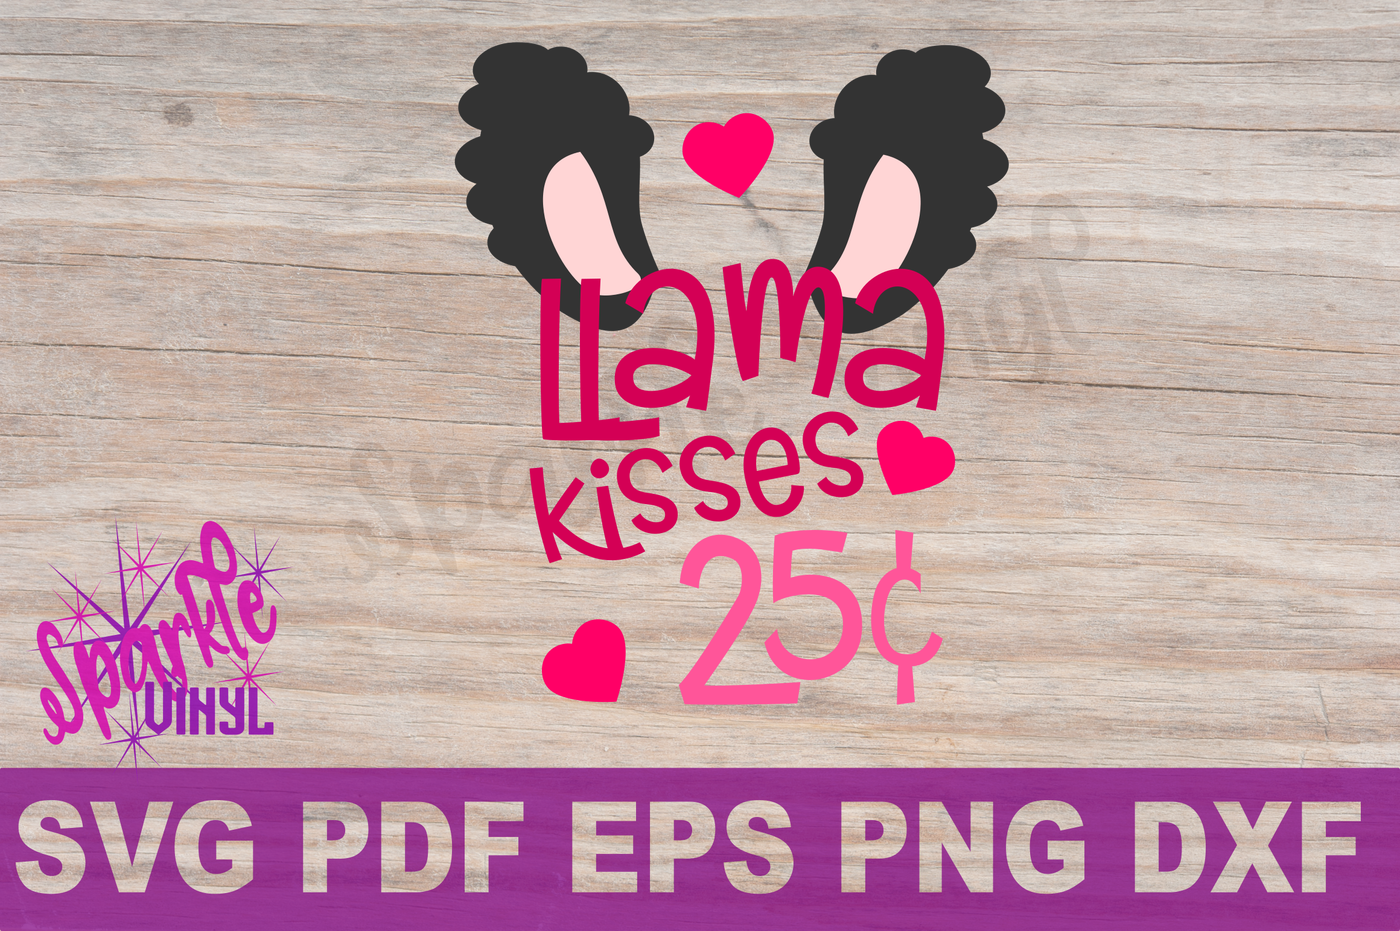 Download Svg Valentine Llama Toddler Girl Kids Adult Ladies Shirt Outfit Valentine Svg Designs Printable Cut File For Cricut Or Silhouette Dxf Eps By Sparkle Vinyl Designs Thehungryjpeg Com